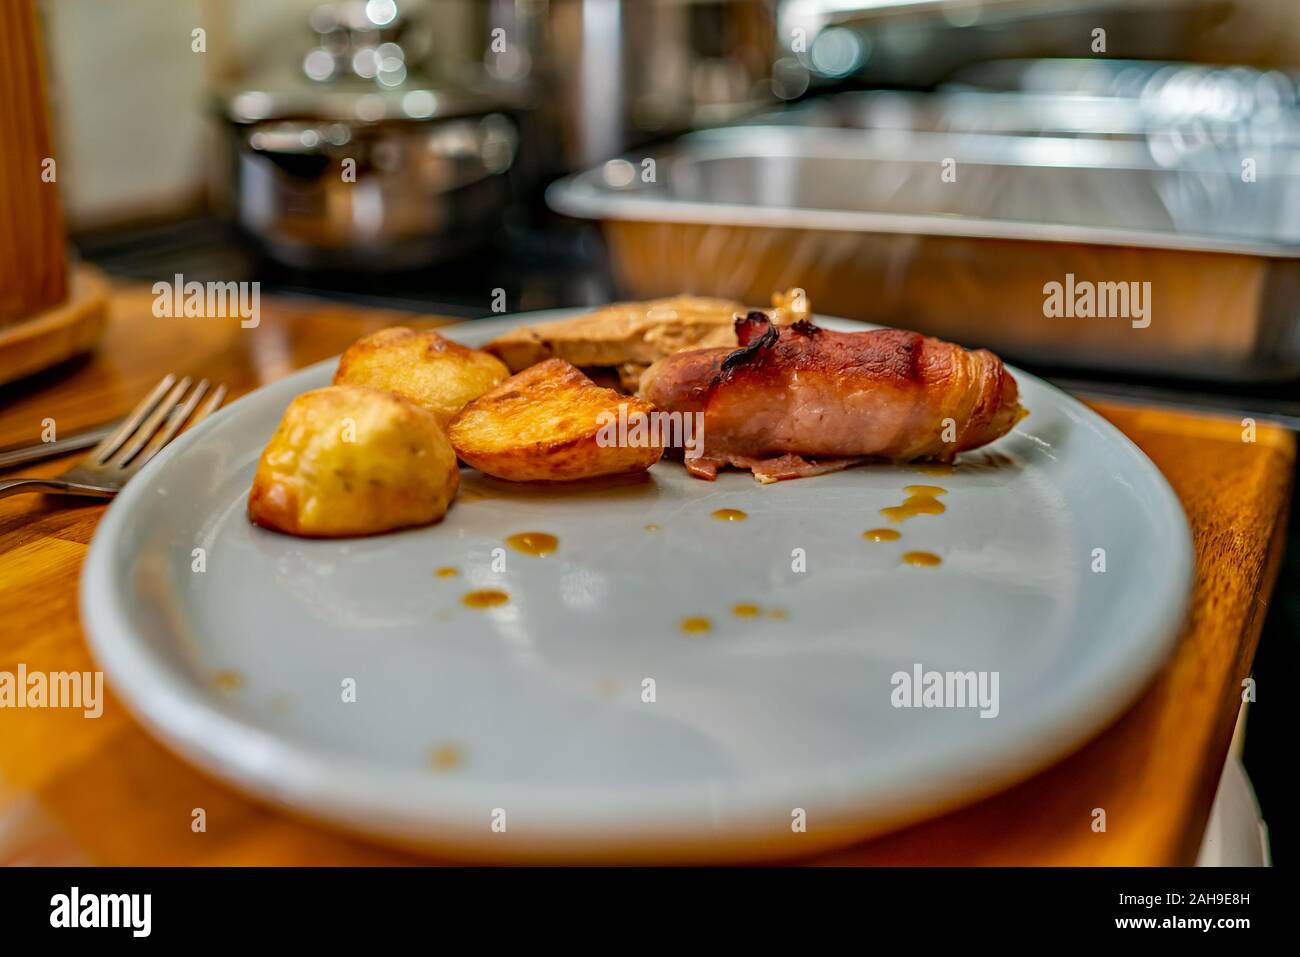 Close up and selective focus of roast potatoes, pig in blanket and roast turkey on a blue oval dinner plate Stock Photo